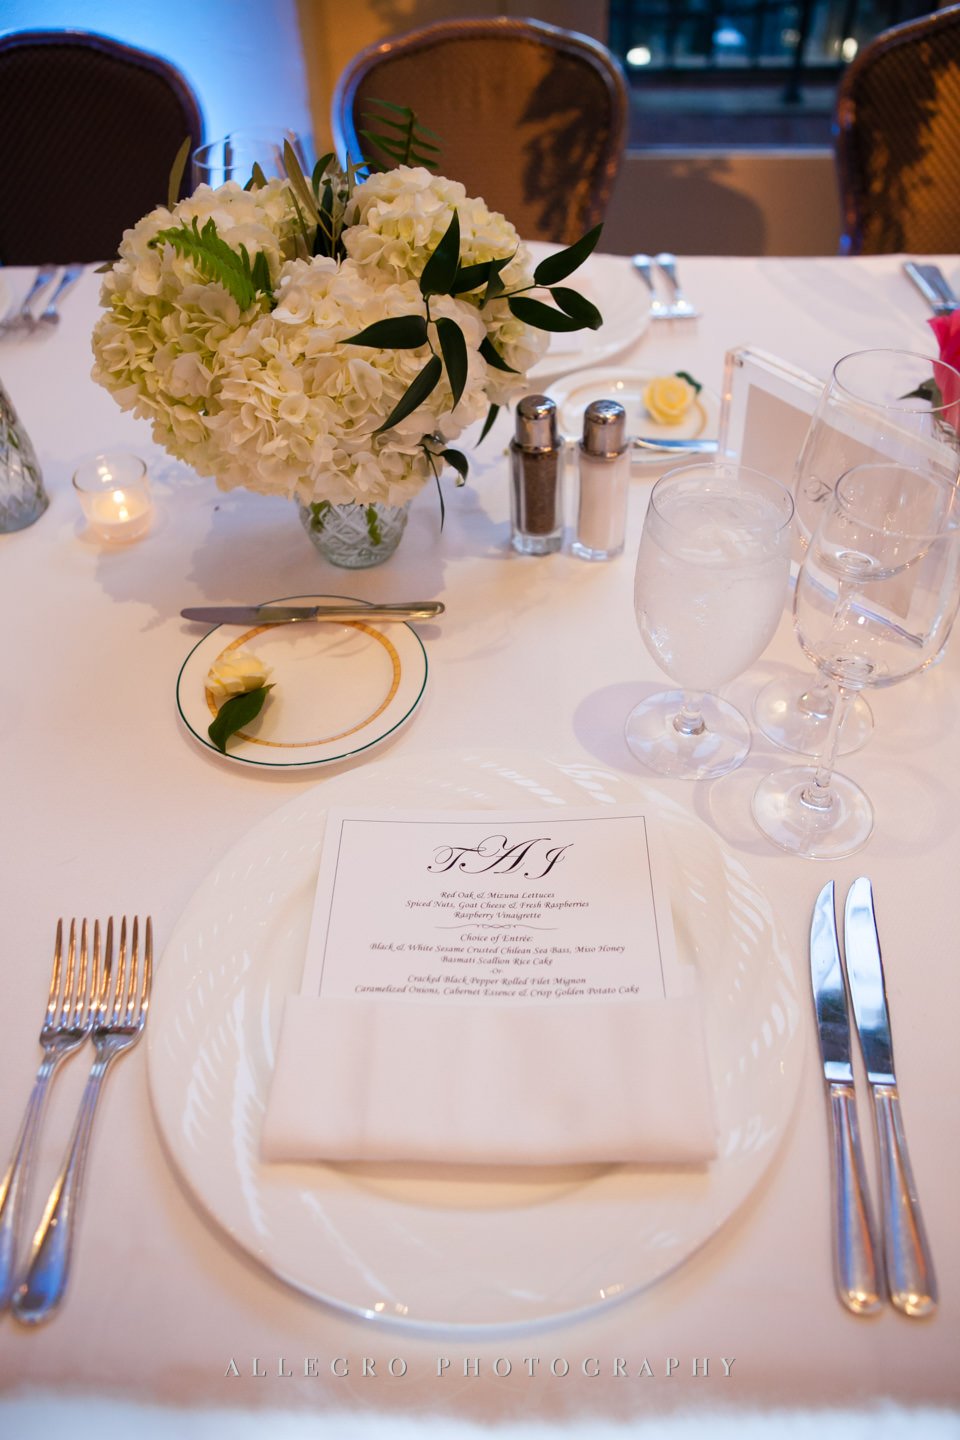 table set up with menu- photo by allegro photography